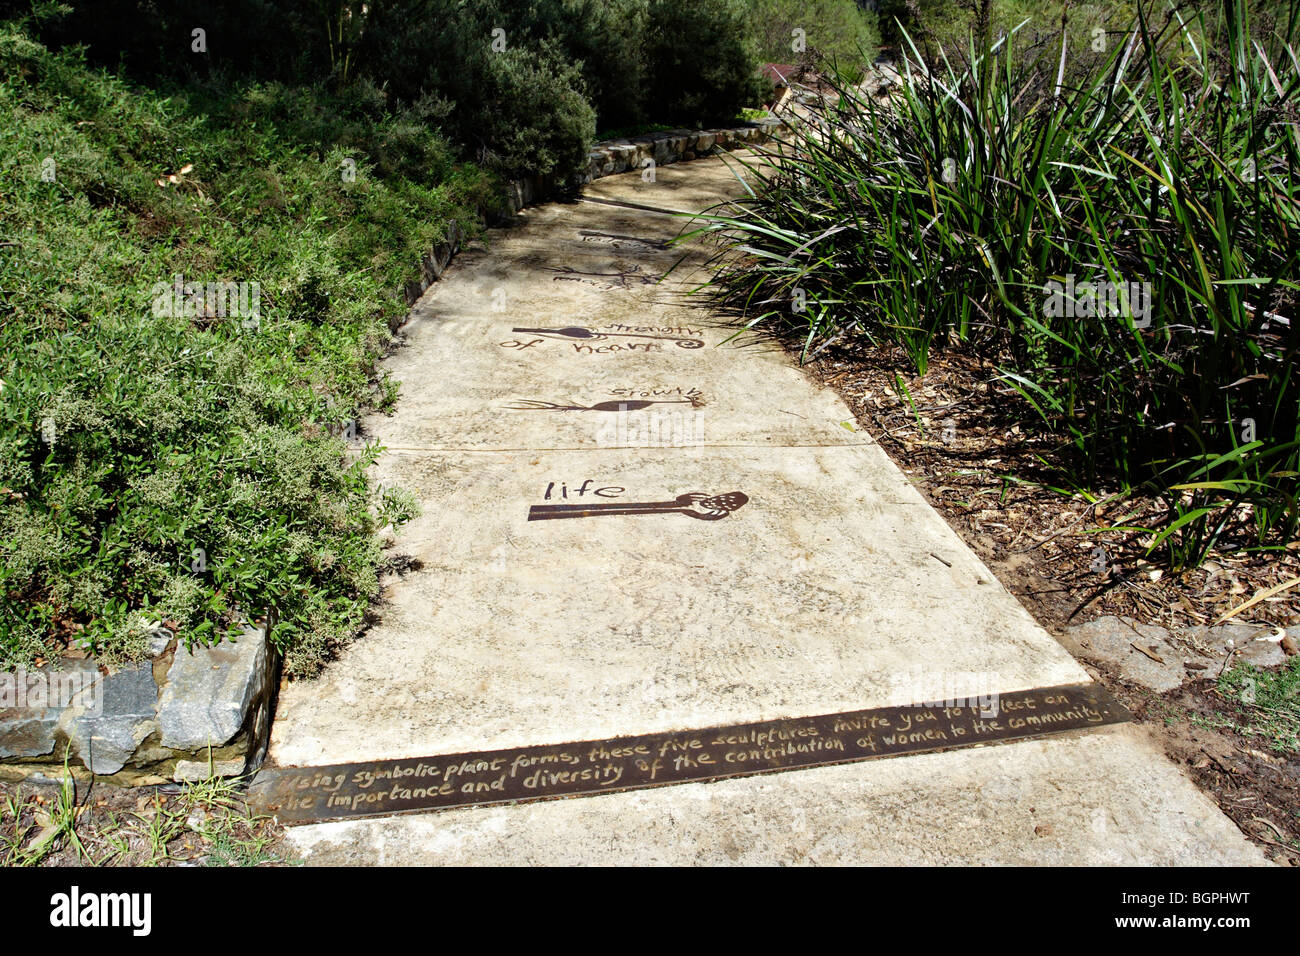 Symbolic plant painting on jogging track at Kings Park in Perth, Western Australia. Stock Photo